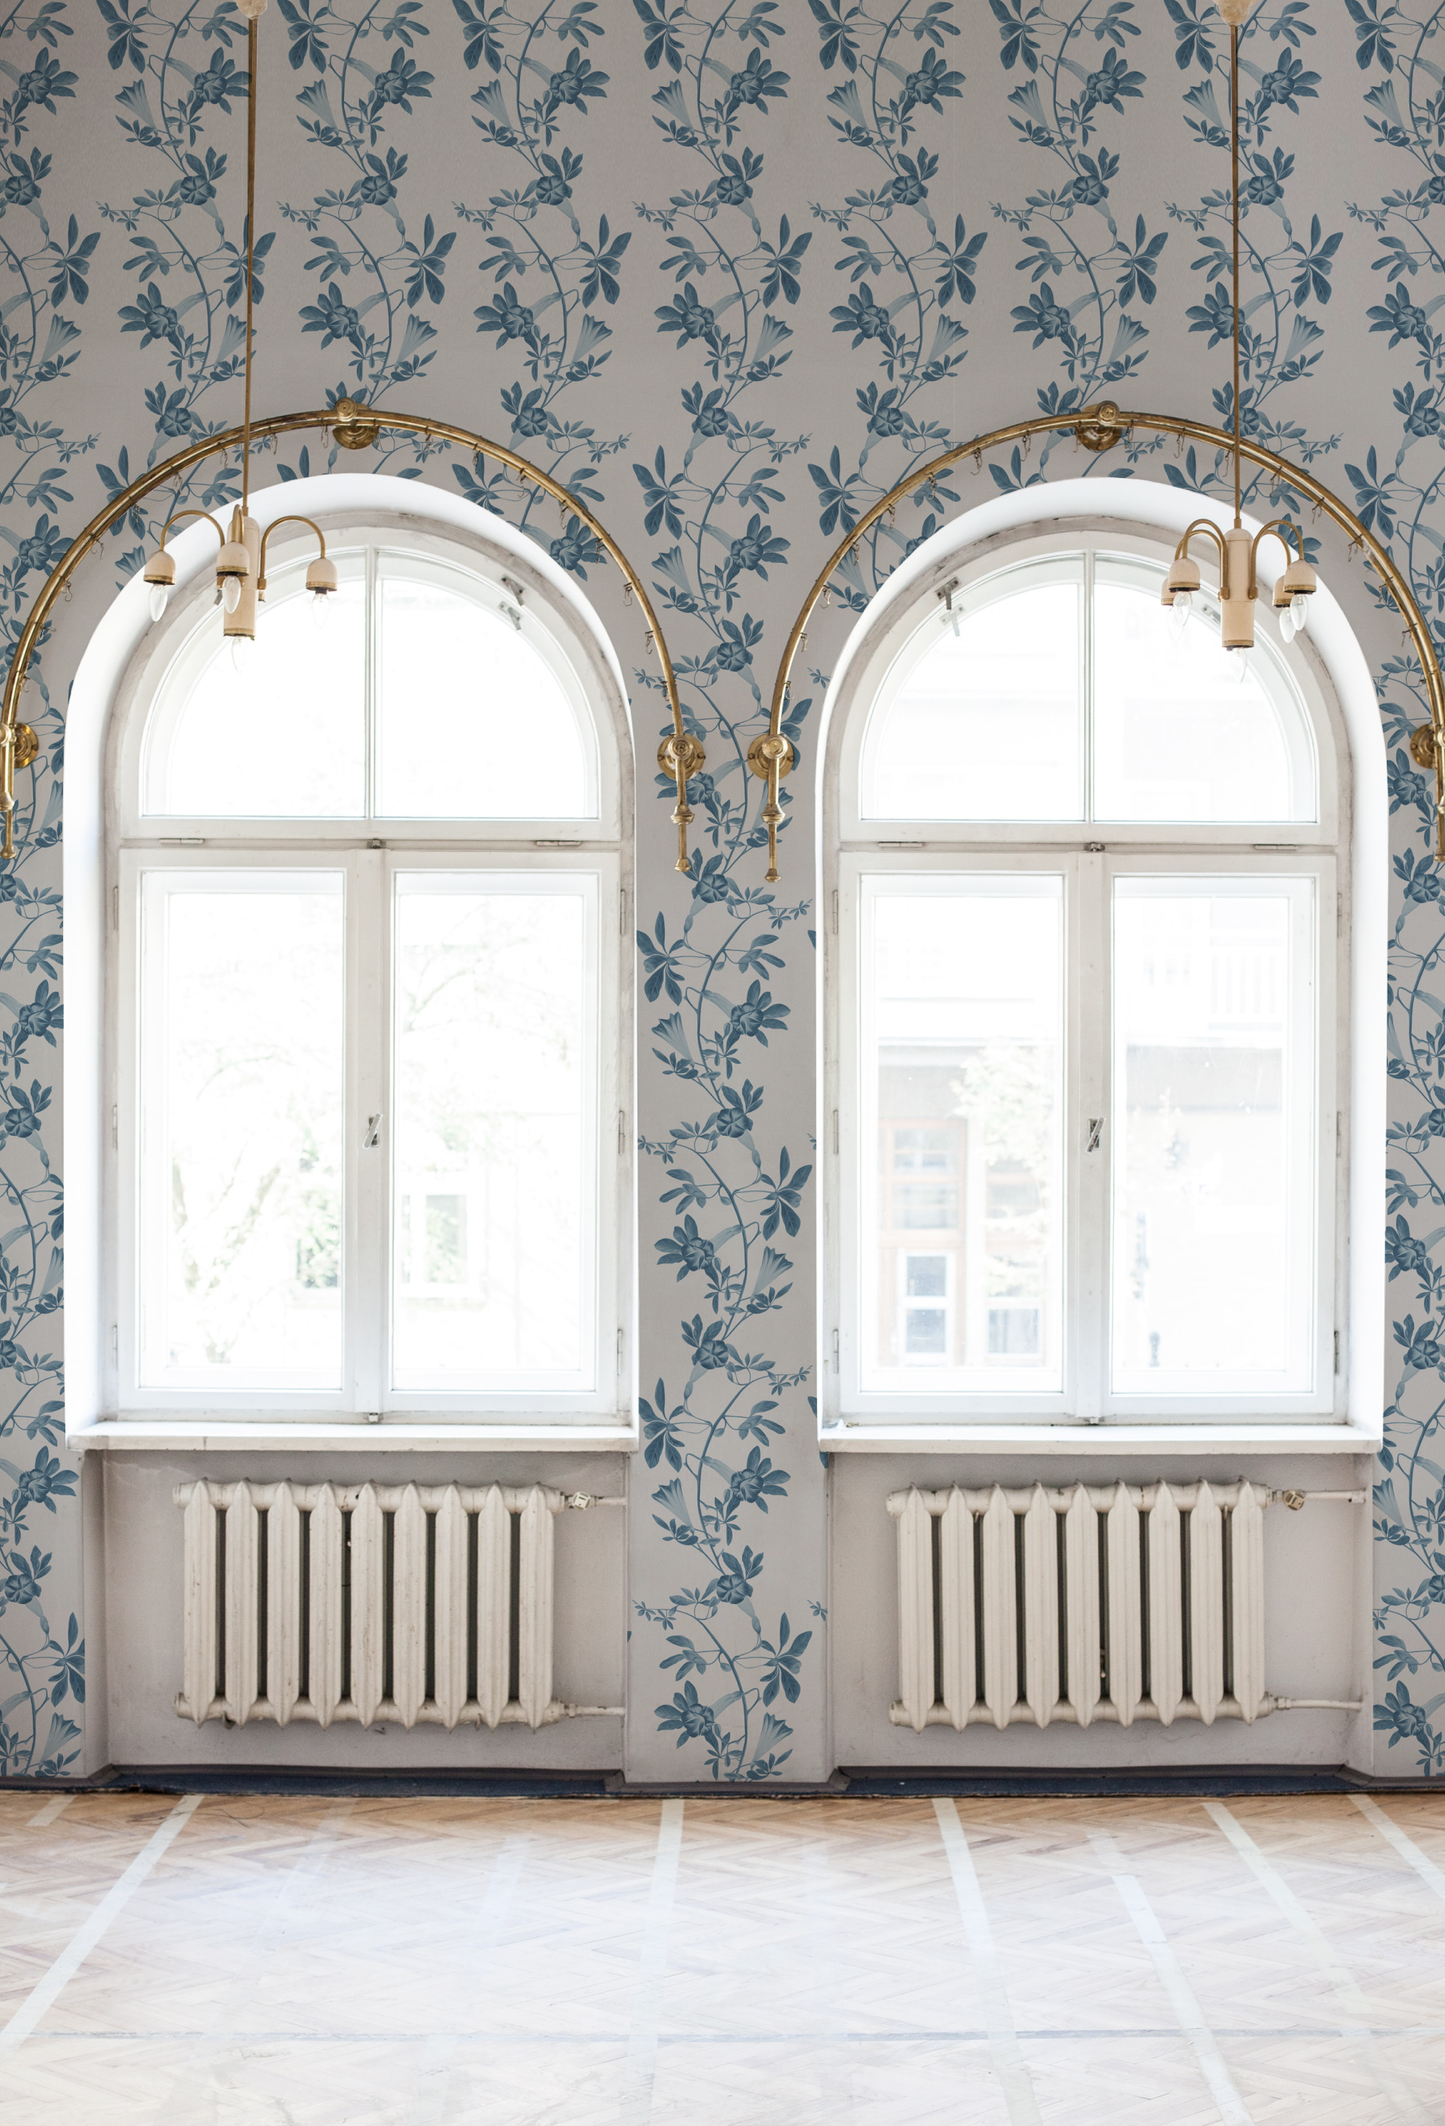 Blue floral striped wallpaper in a room with large oval windows featuring the Midsummer in Iris from Deus ex Gardenia. Photo by Katie Luka.